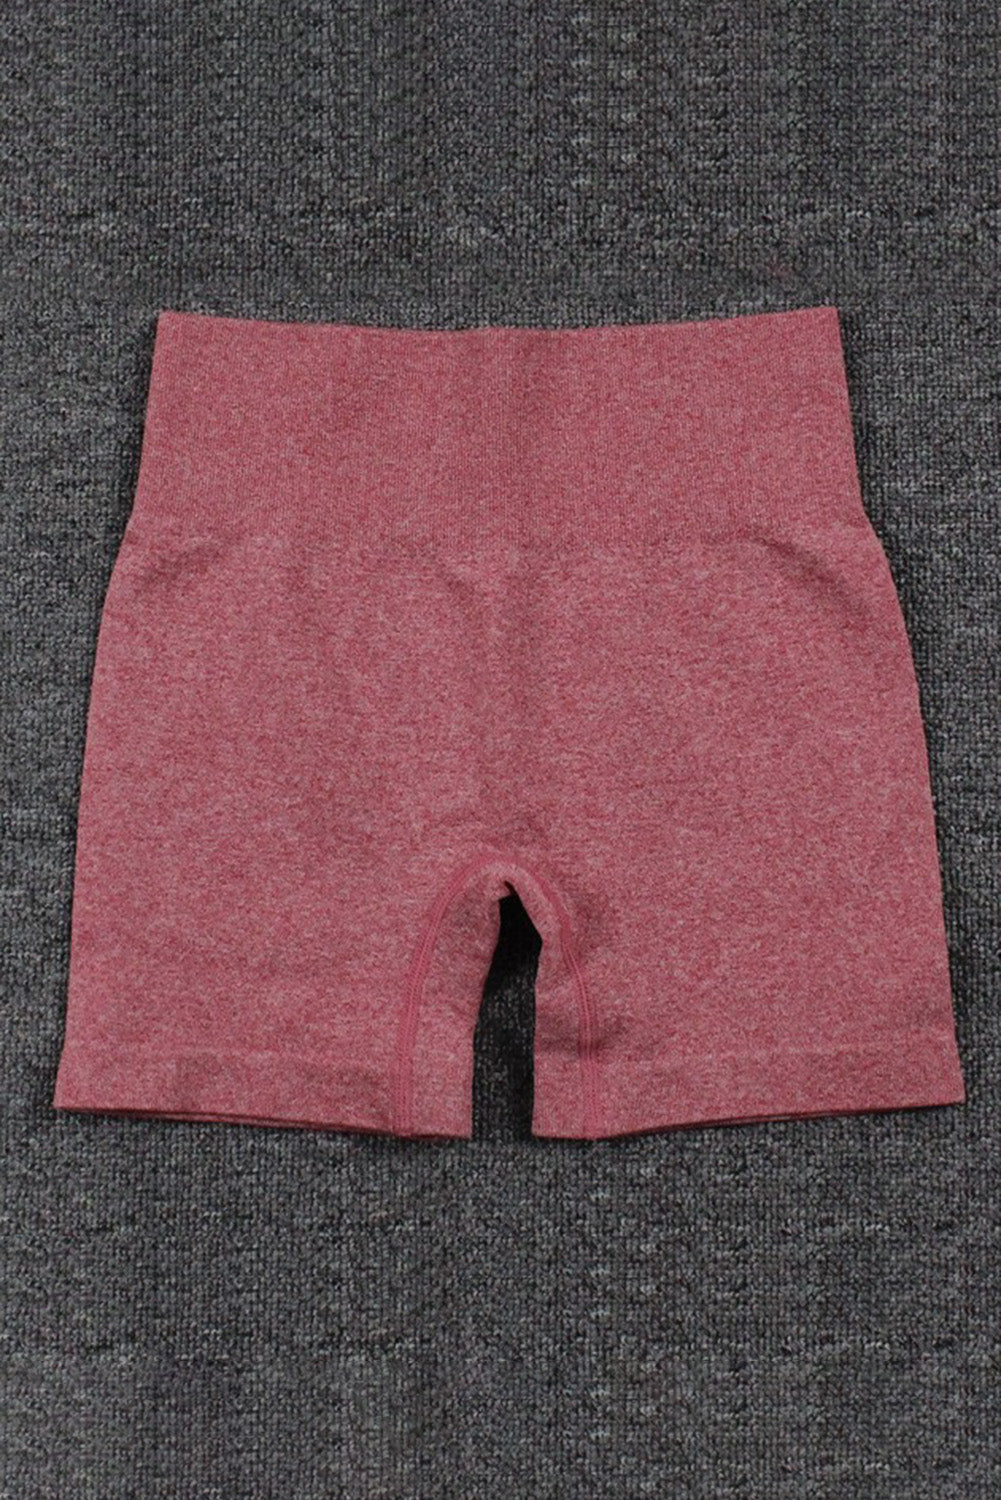 Red Solid Color High Waist Sports Active Shorts